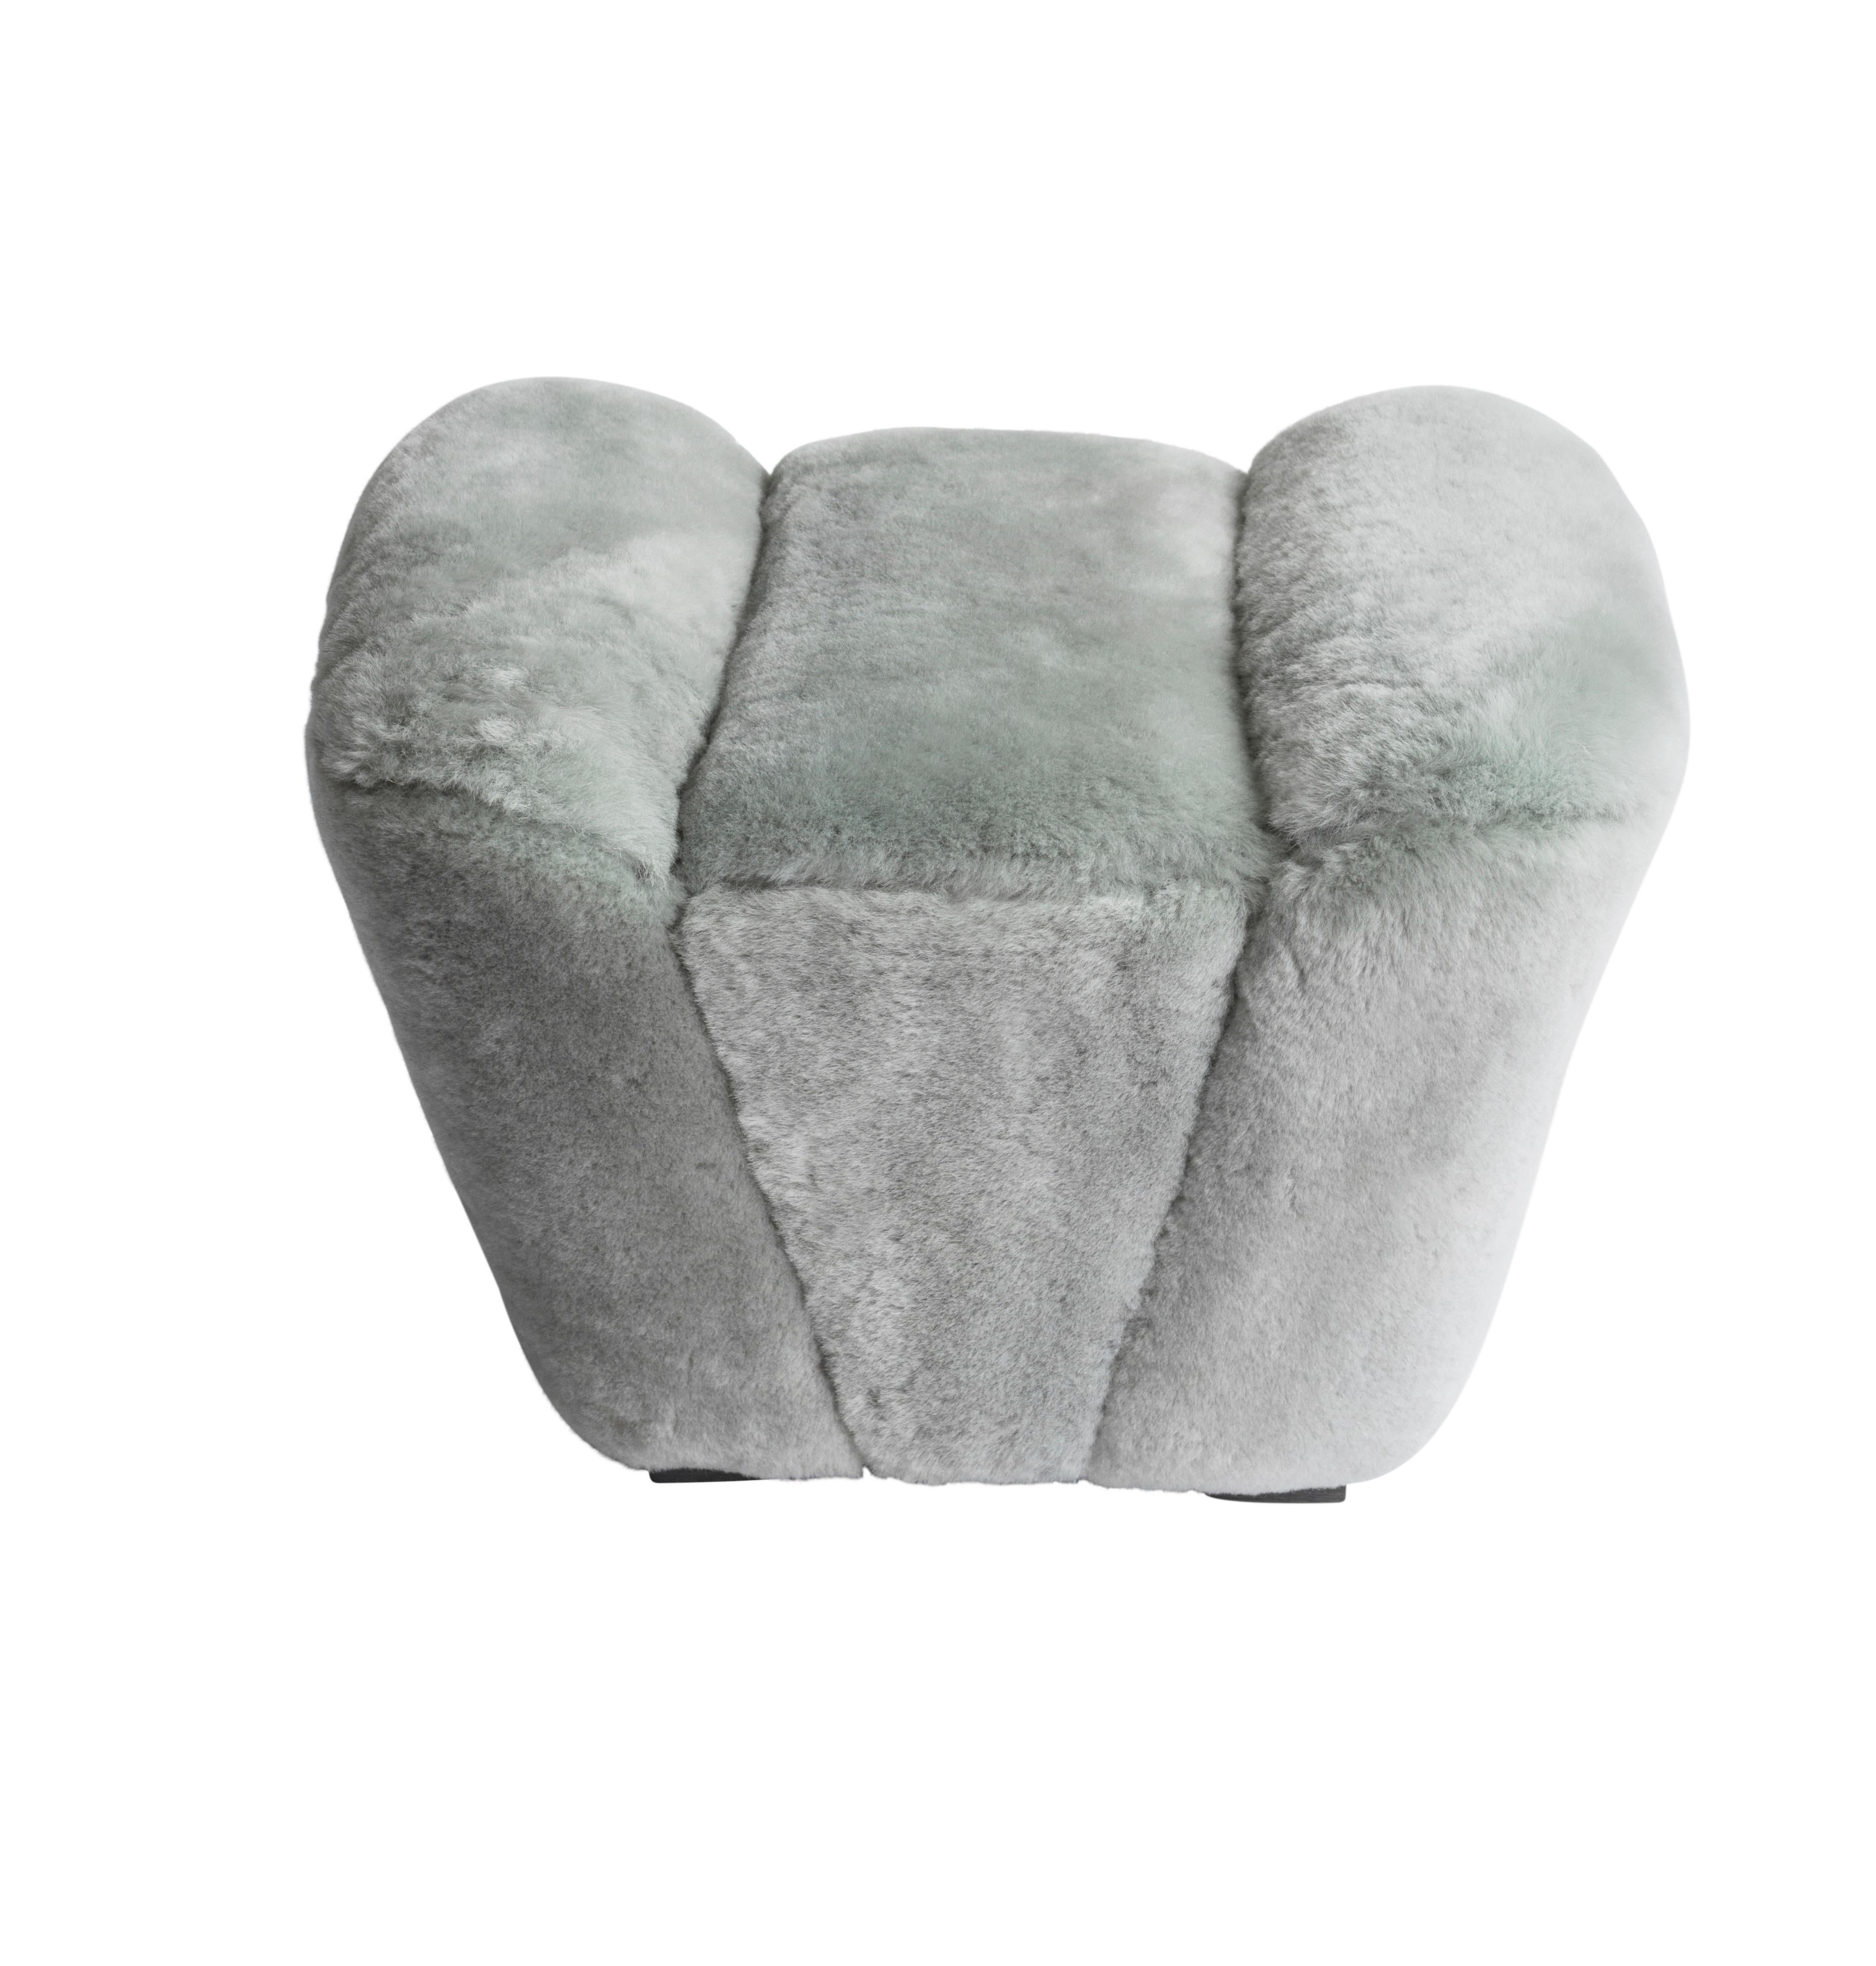 Modern Contemporary Truffle Ottoman or Footstool in Grey Sheepskin Upholstery For Sale